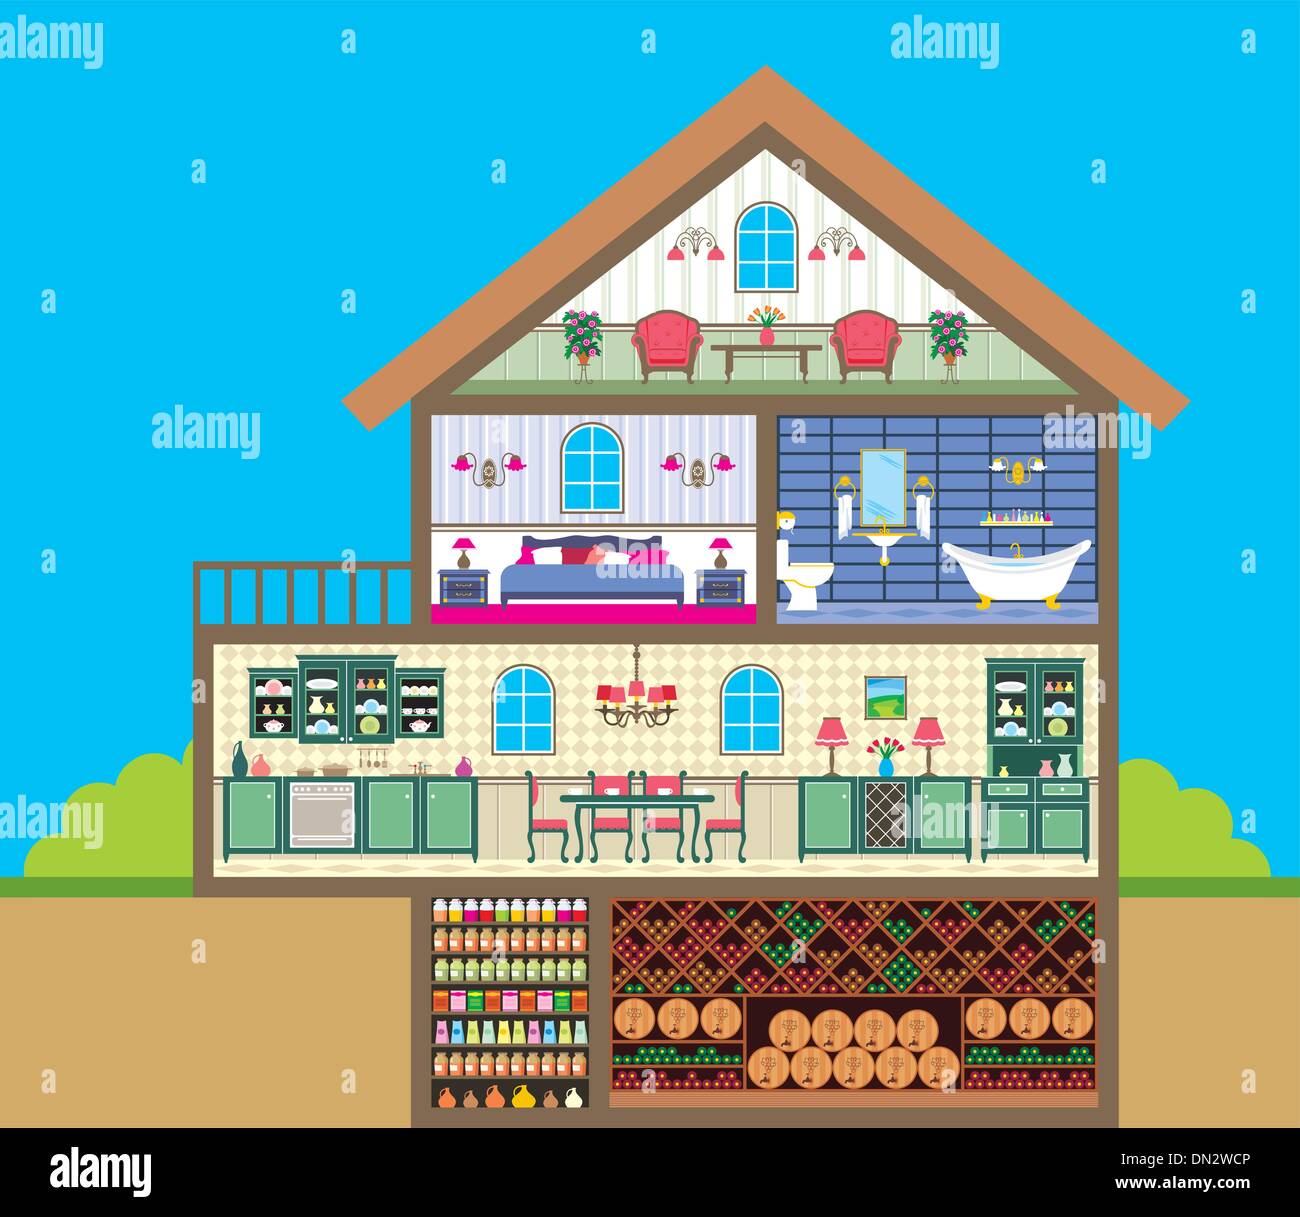 House in a cut Stock Vector